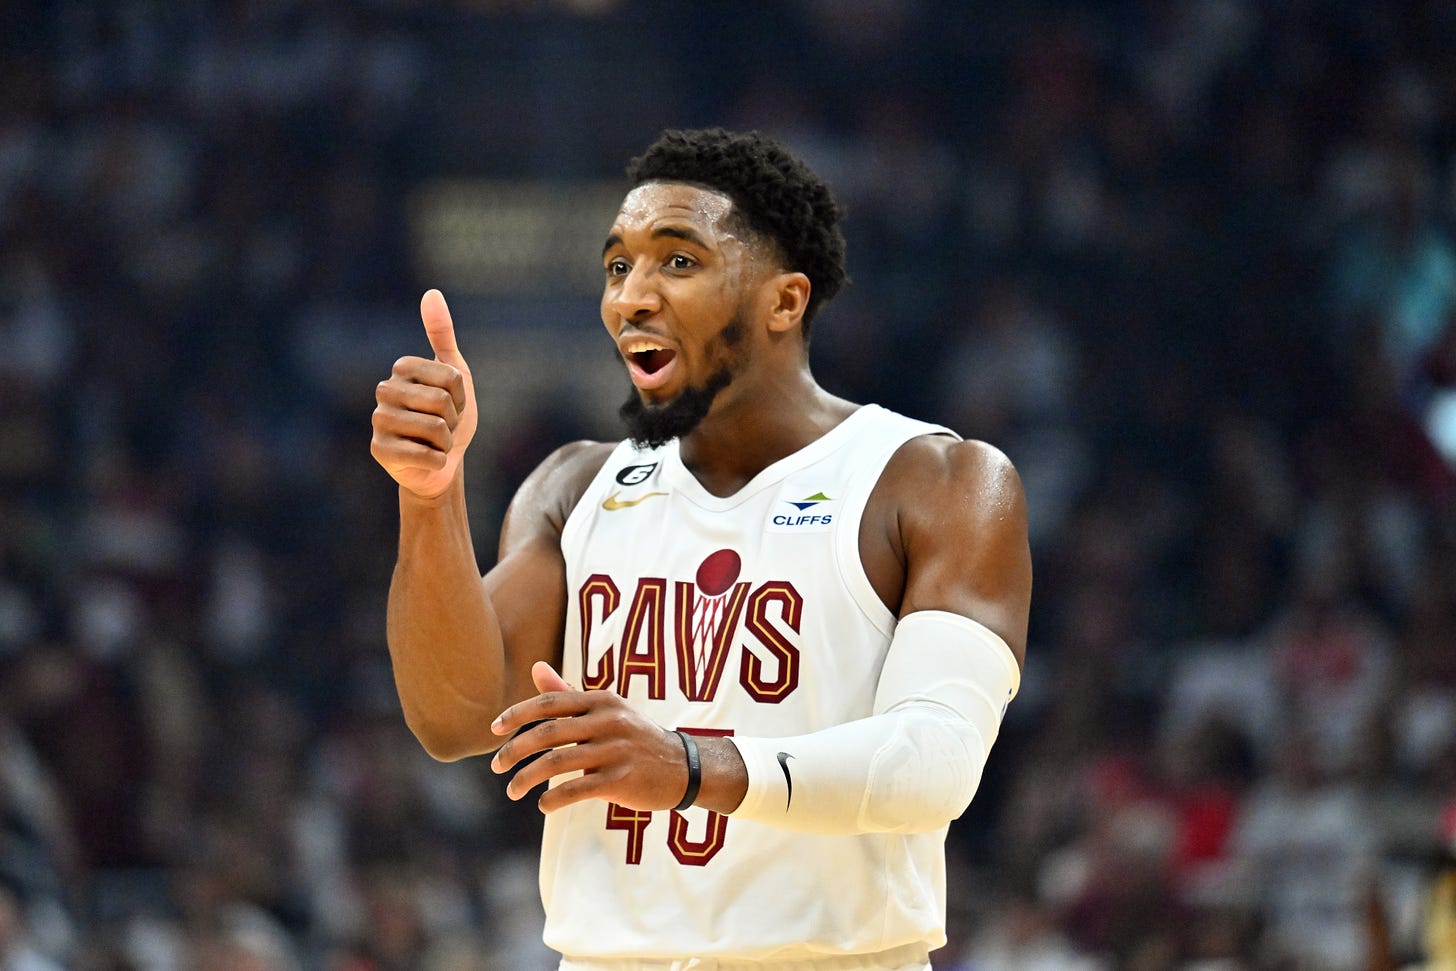 CLEVELAND, OHIO - OCTOBER 23: Donovan Mitchell #45 of the Cleveland Cavaliers reacts during the second quarter against the Washington Wizards at Rocket Mortgage Fieldhouse on October 23, 2022 in Cleveland, Ohio. 